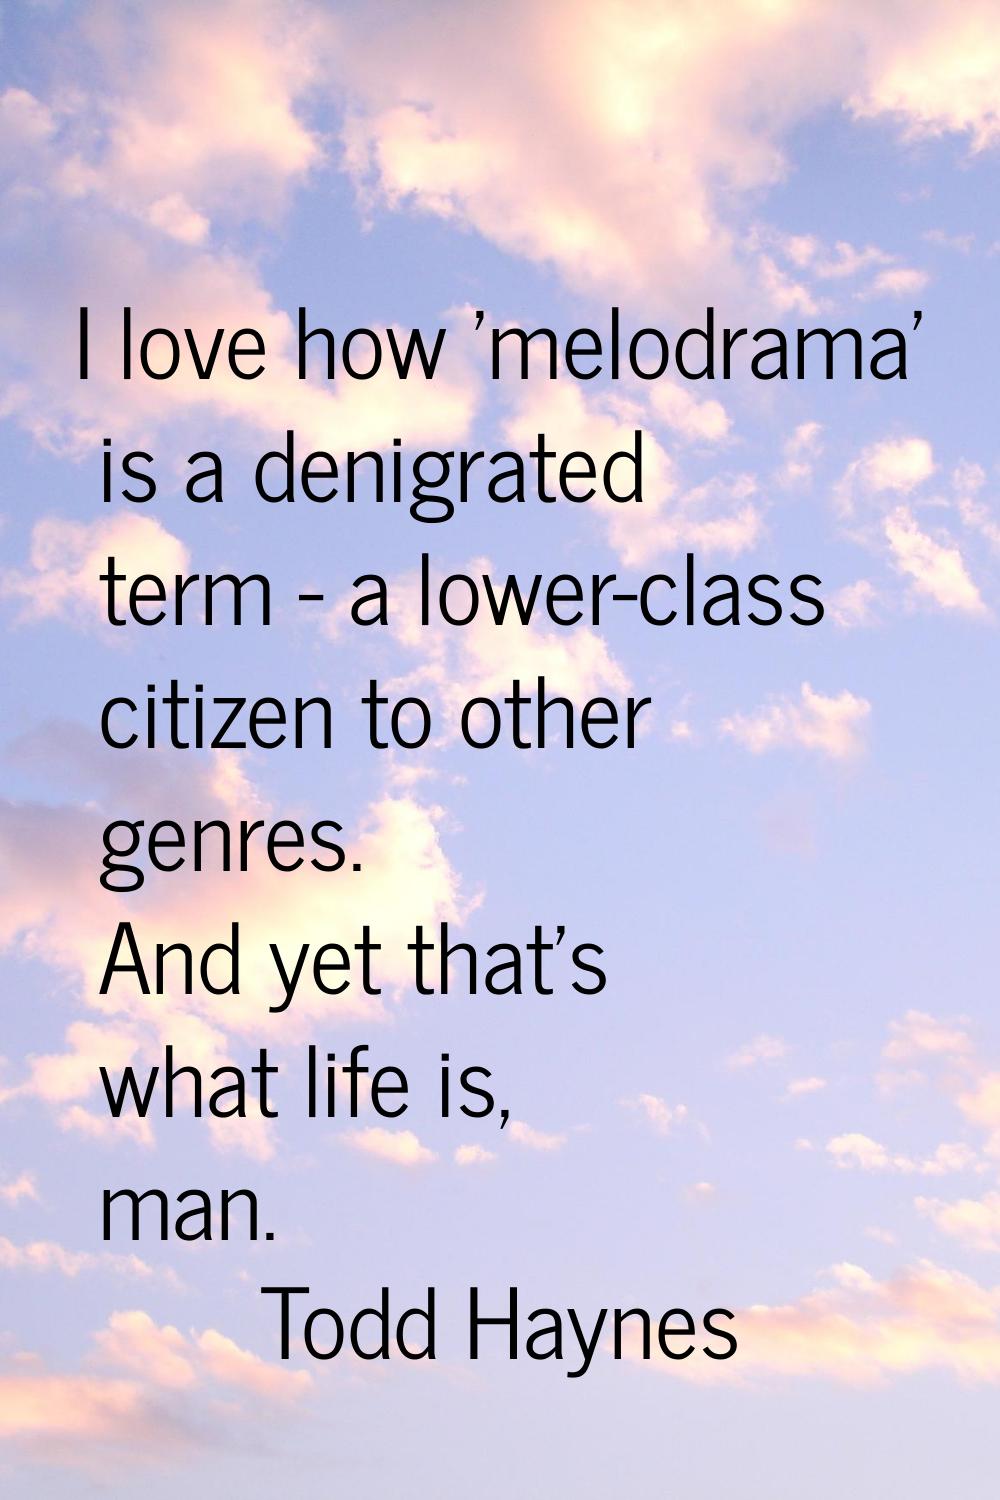 I love how 'melodrama' is a denigrated term - a lower-class citizen to other genres. And yet that's